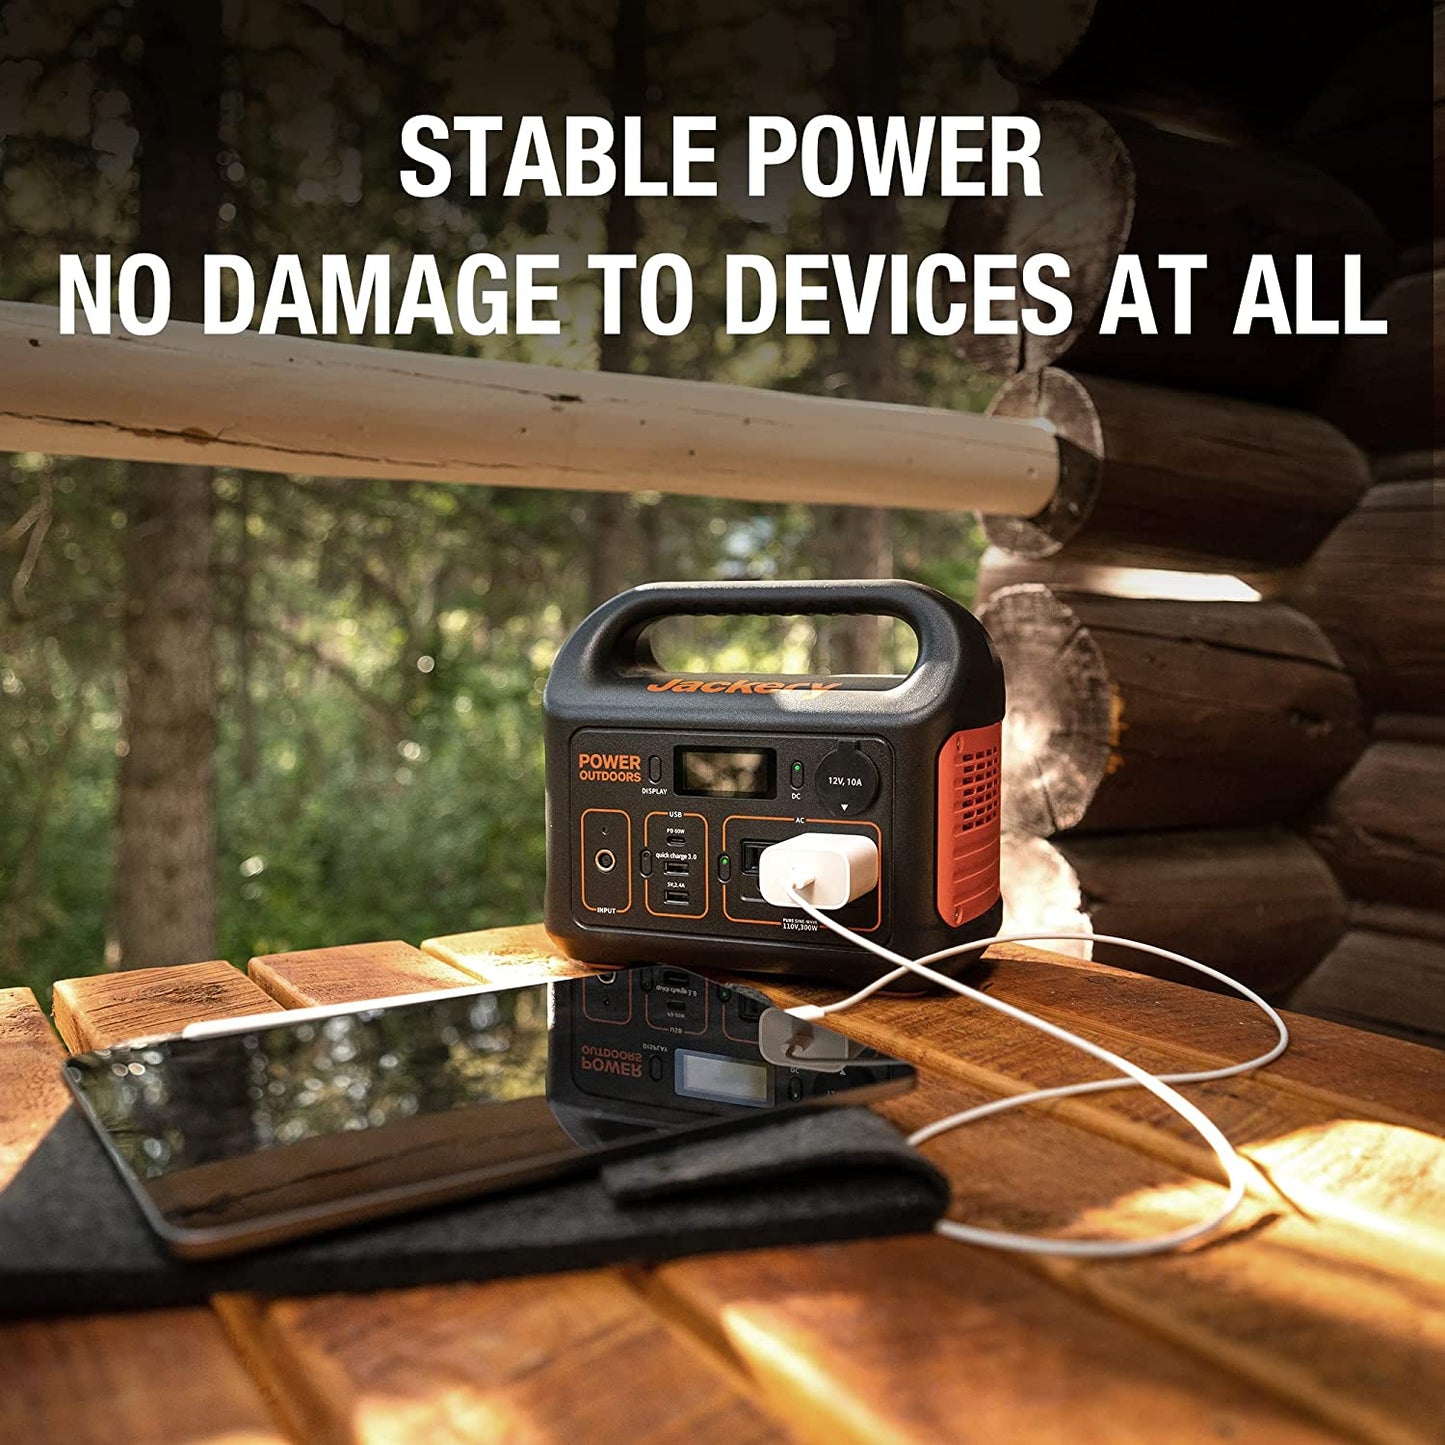 A Jackery portable power station is outdoors with an ipad plugged in getting charged up. The text reads, 'Stable power, no damage to devices at all.'